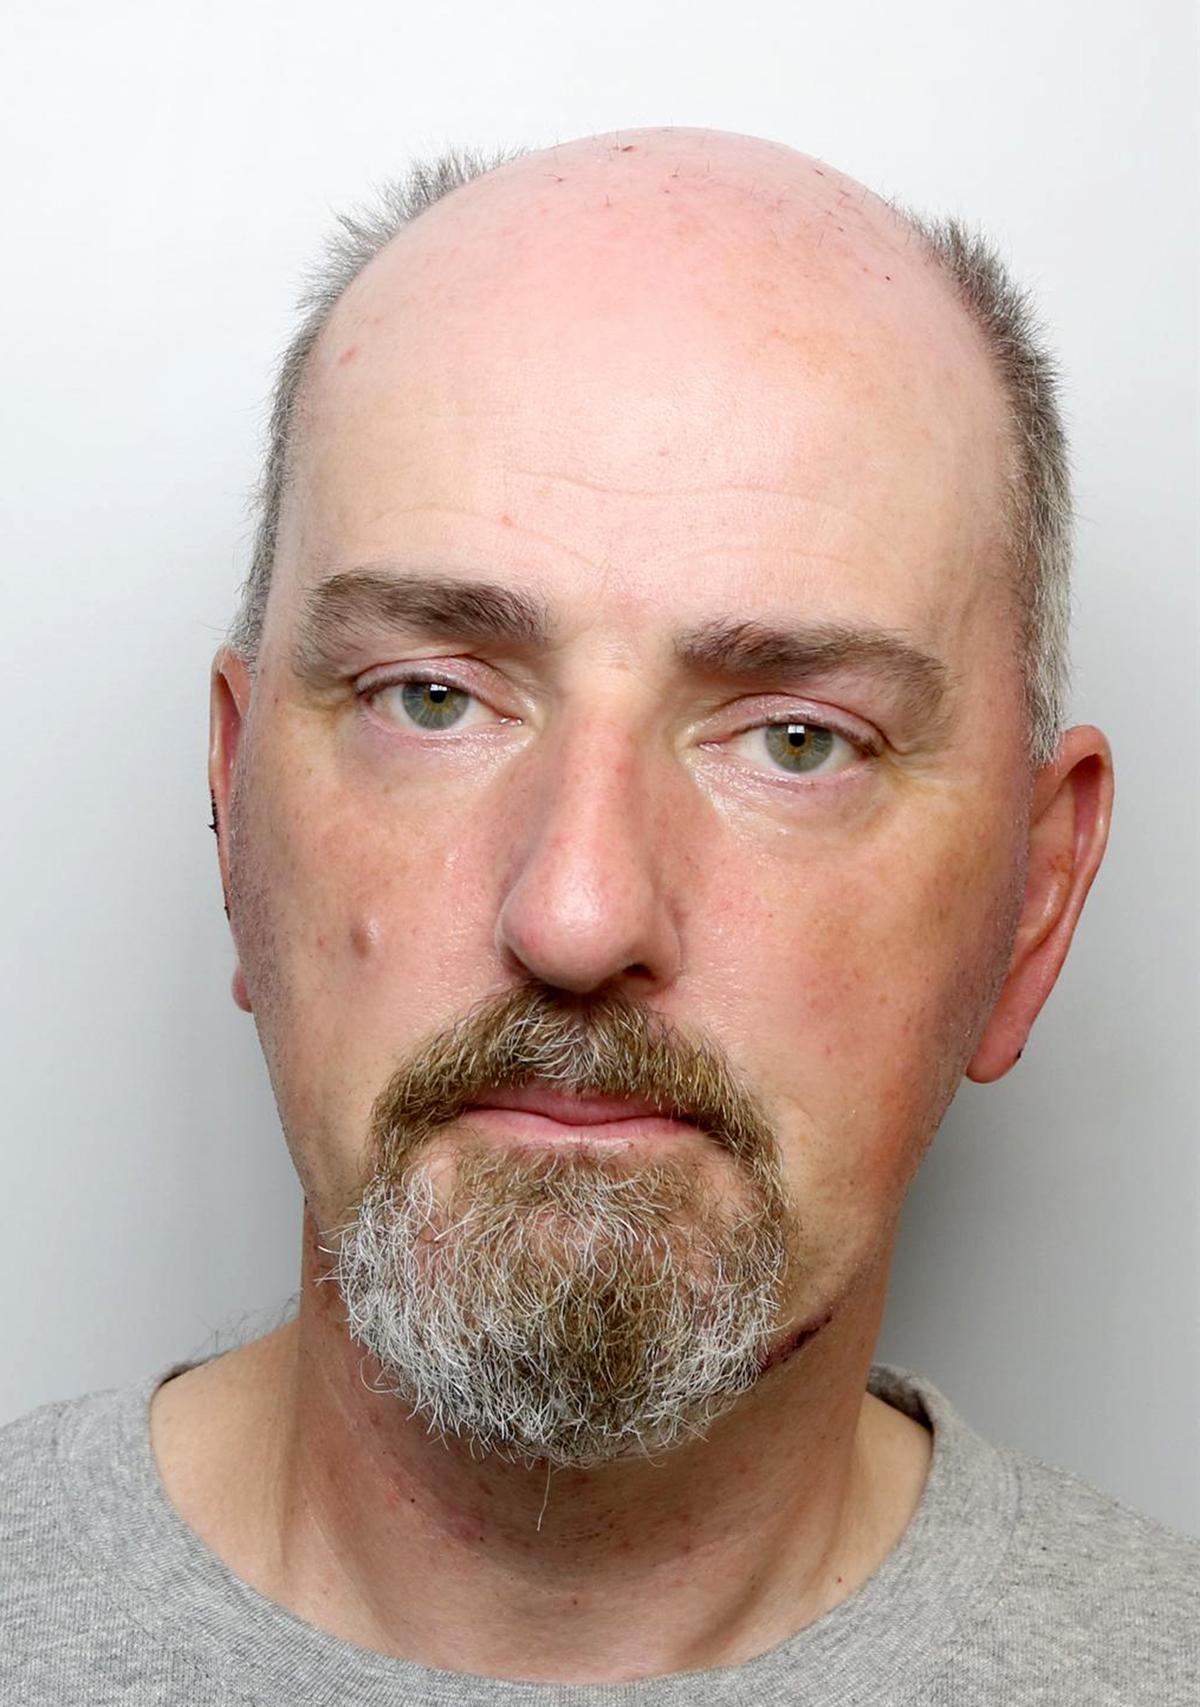 This is an undated West Yorkshire Police handout image of Thomas Mair. (West Yorkshire Police, via AP)